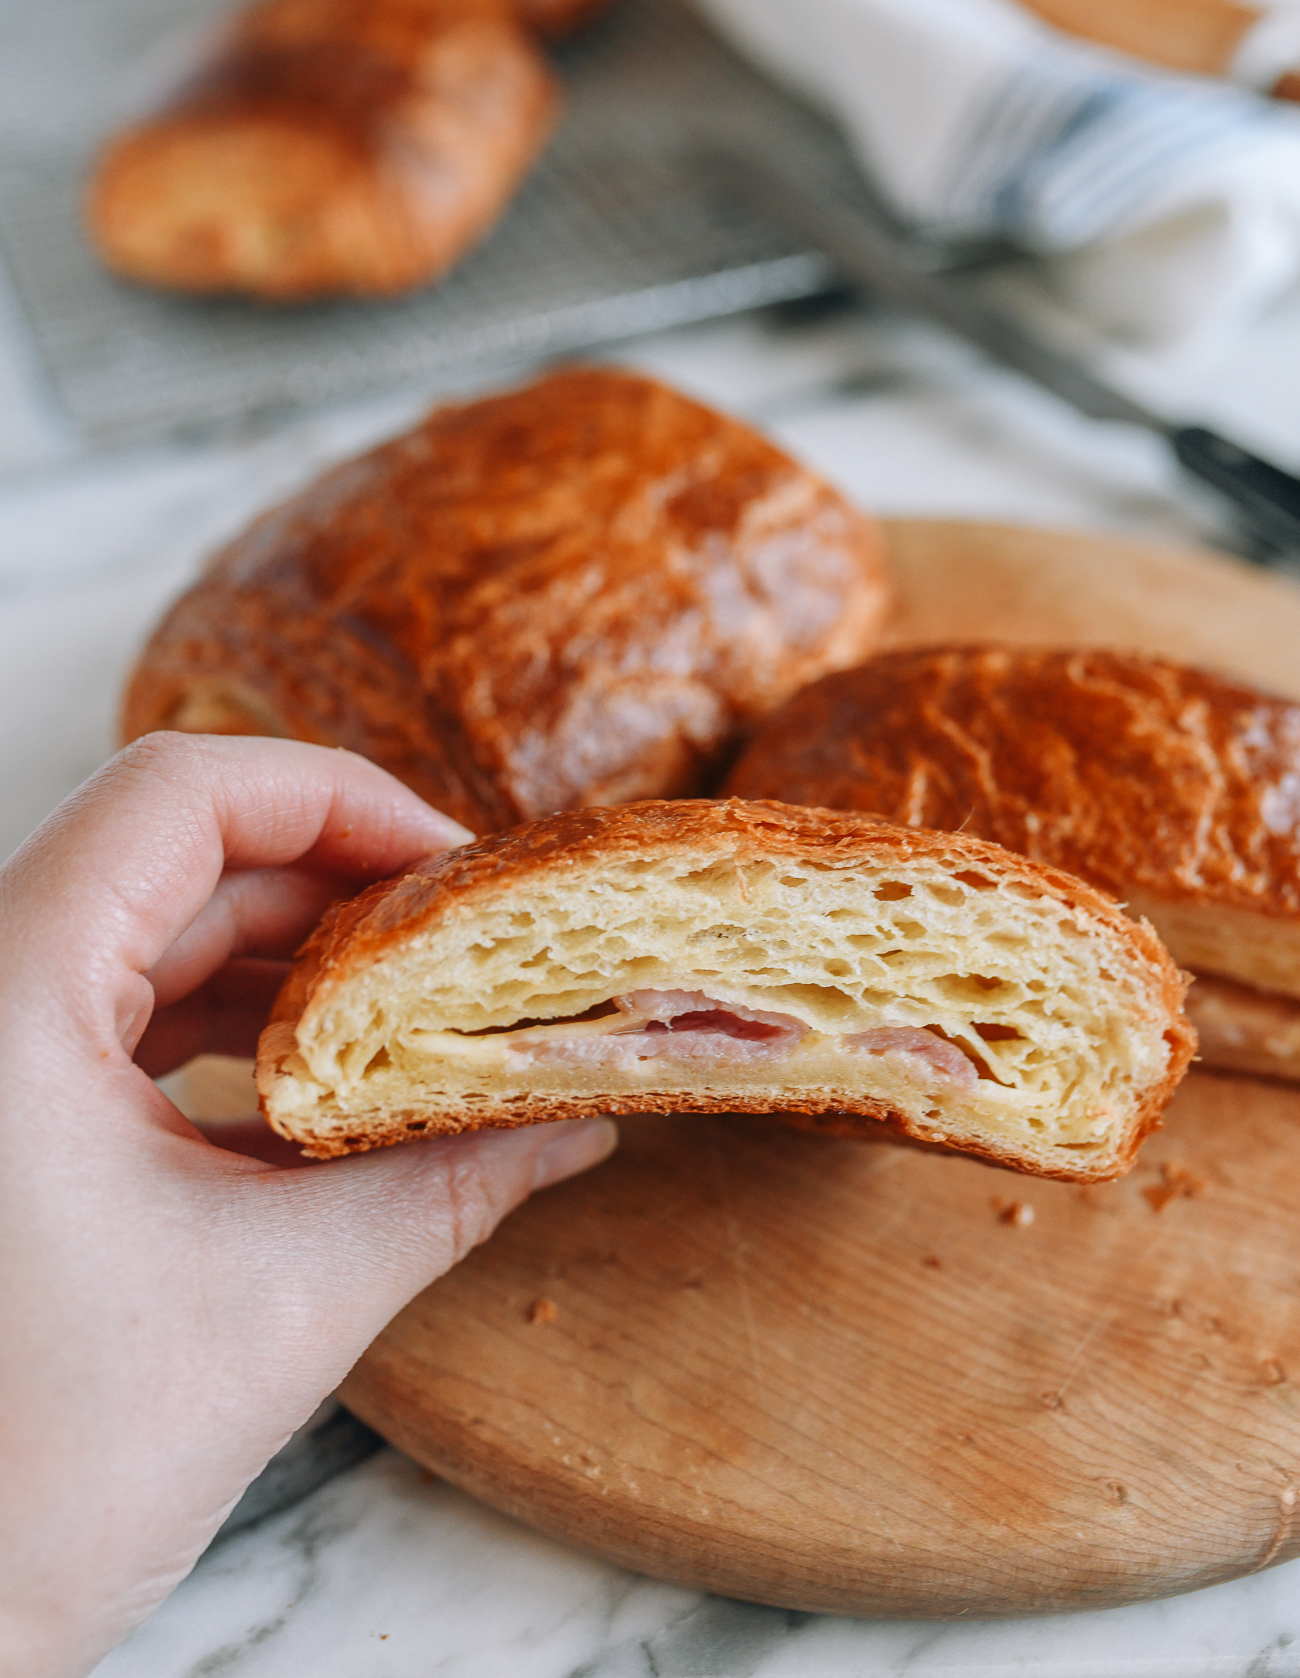 Enjoying a ham and cheese croissant